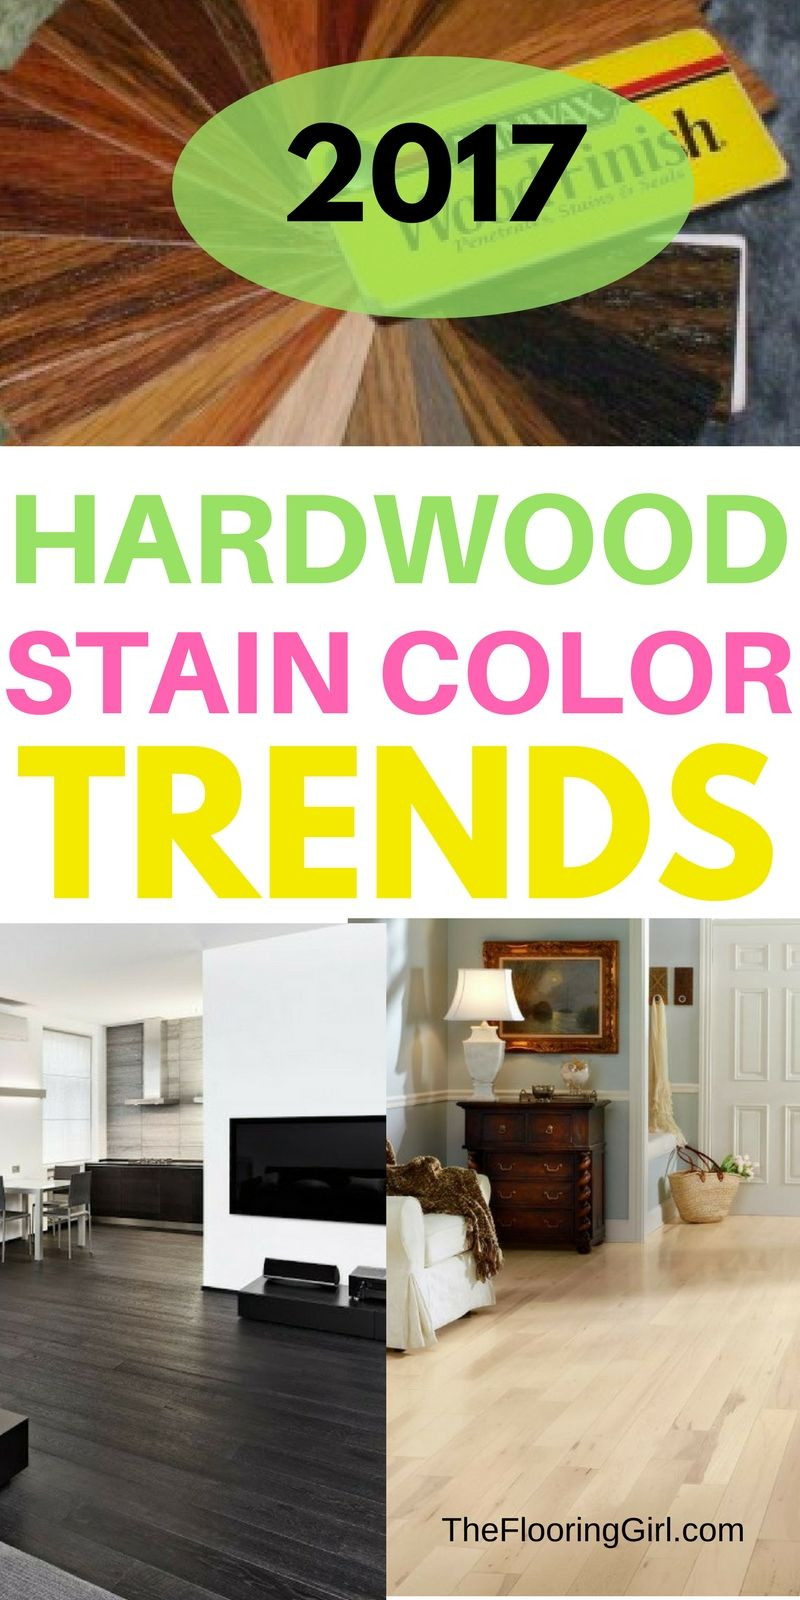 12 Best Hardwood Floor Refinishing Reviews 2024 free download hardwood floor refinishing reviews of hardwood flooring stain color trends 2018 more from the flooring in hardwood flooring stain color trends for 2017 hardwood colors that are in style thef